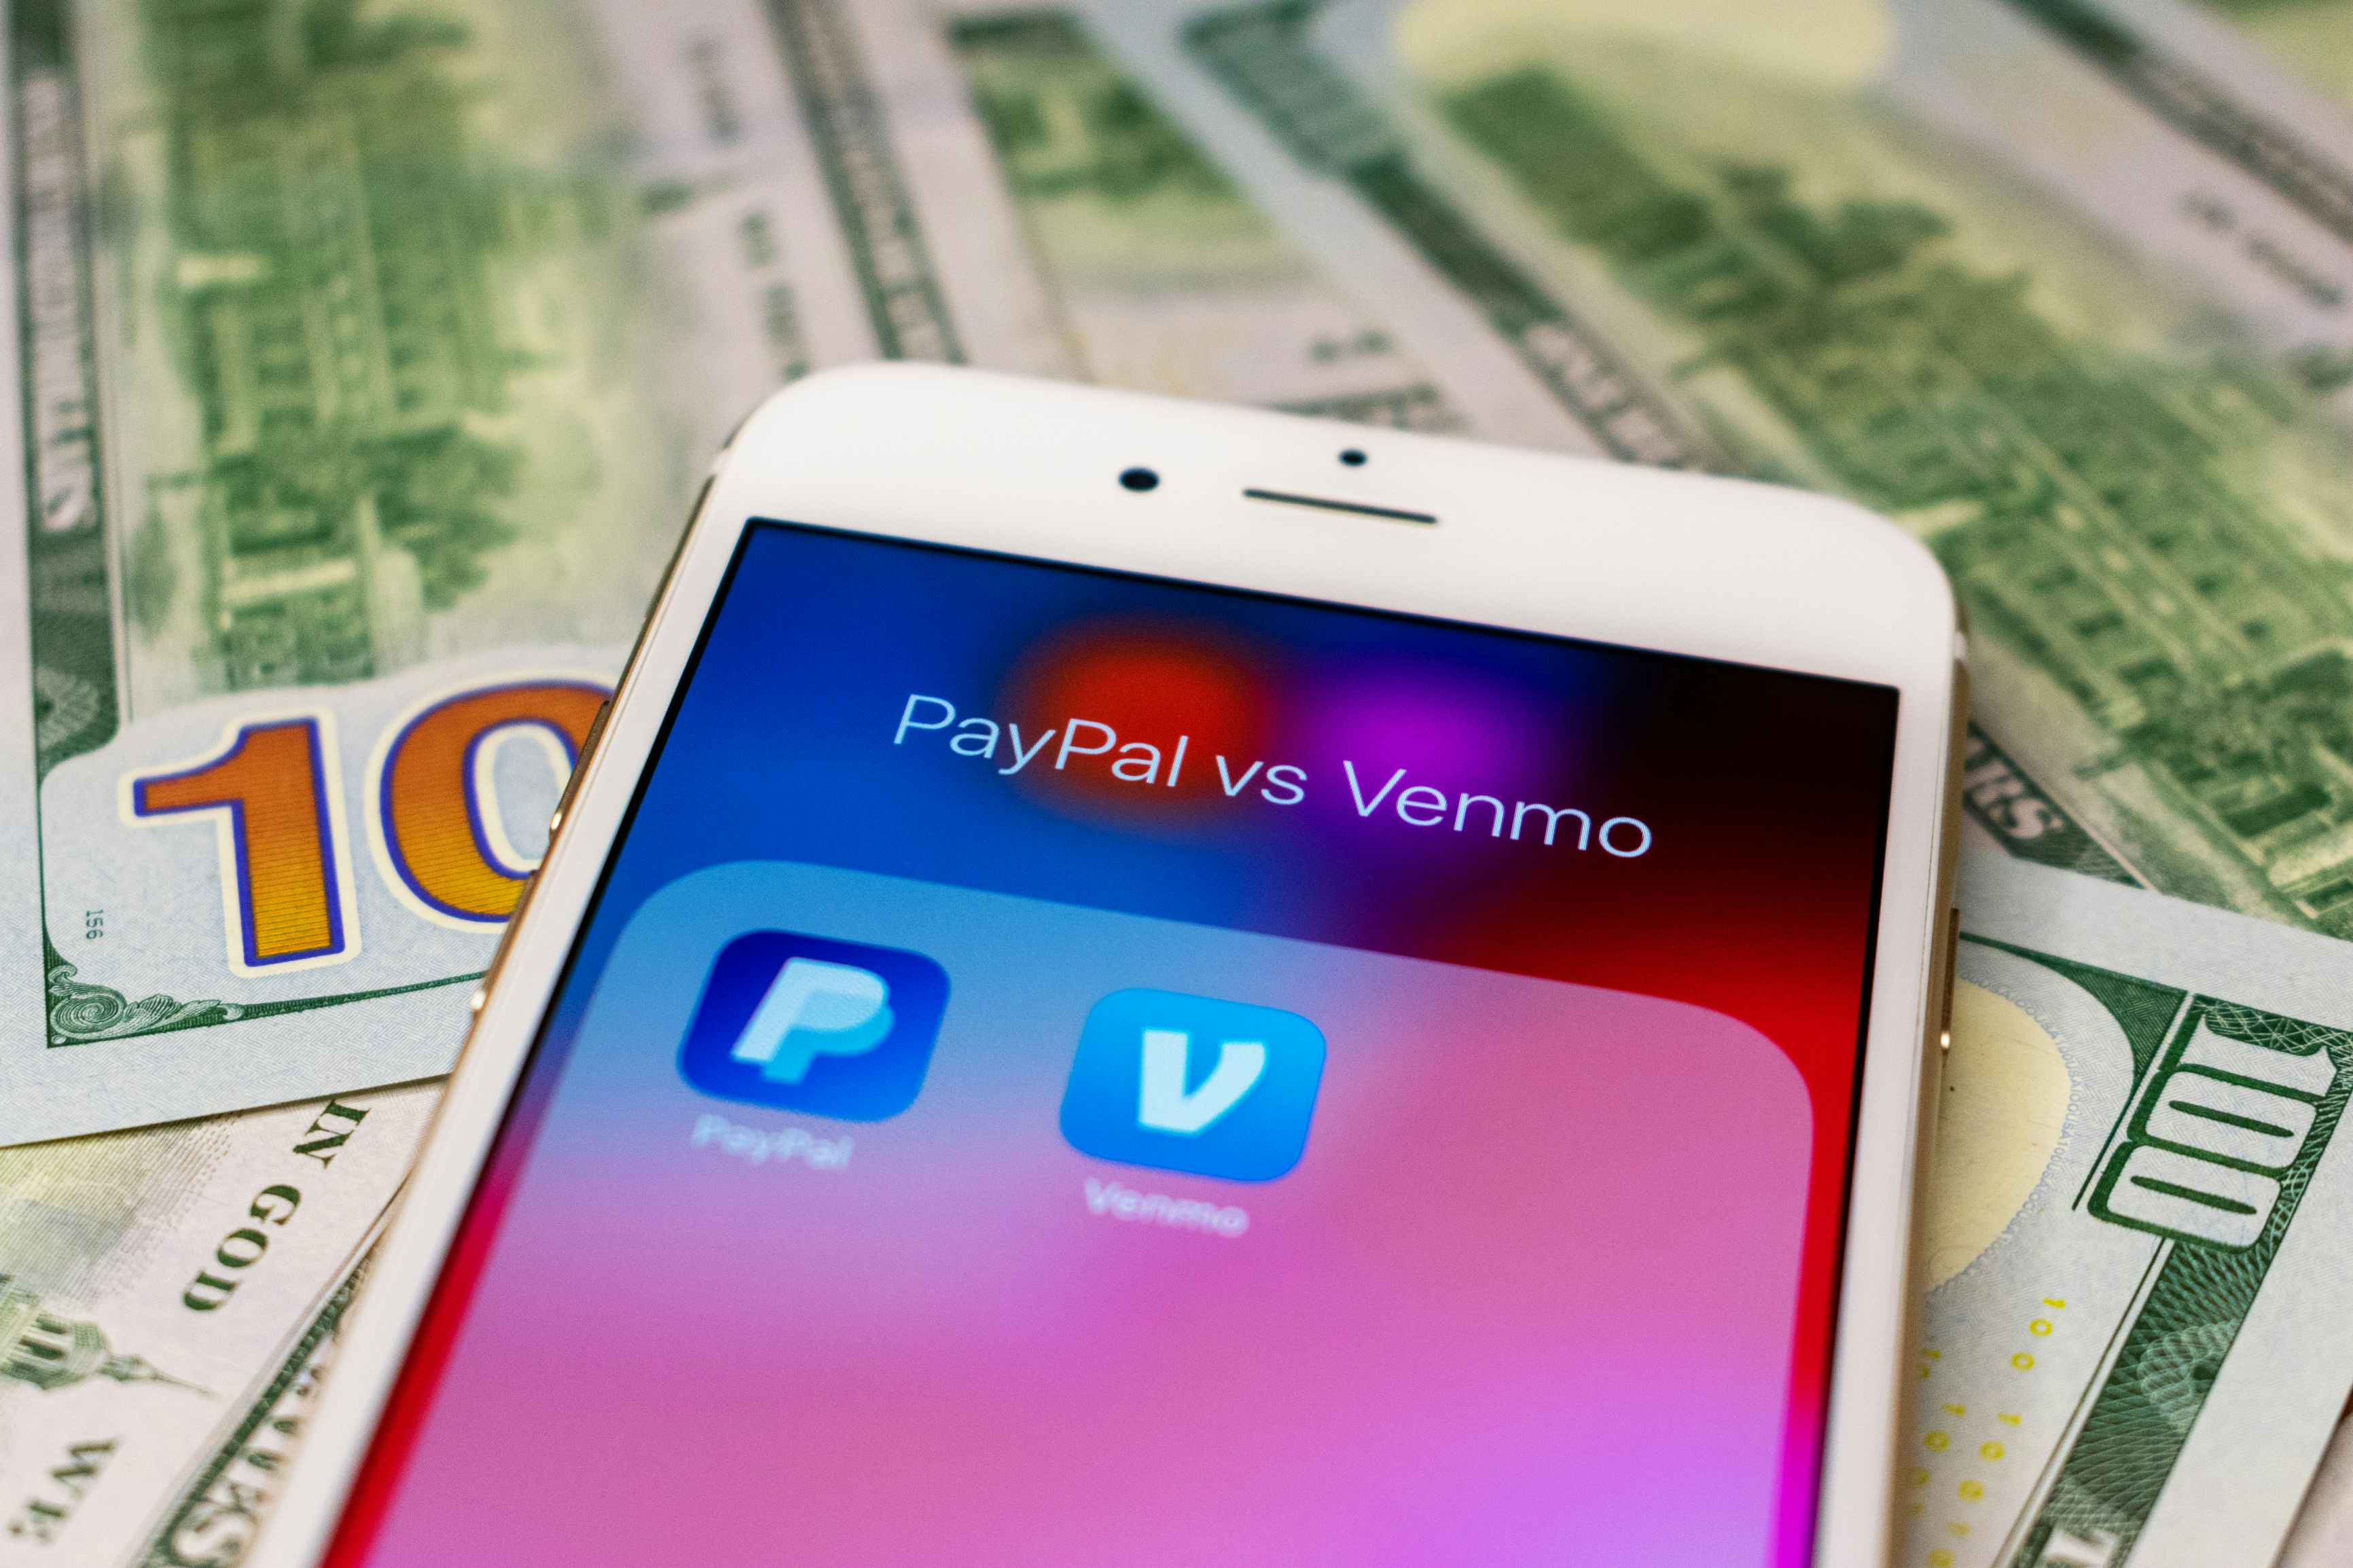 phone on top of money with a screen showing the venmo and paypal app